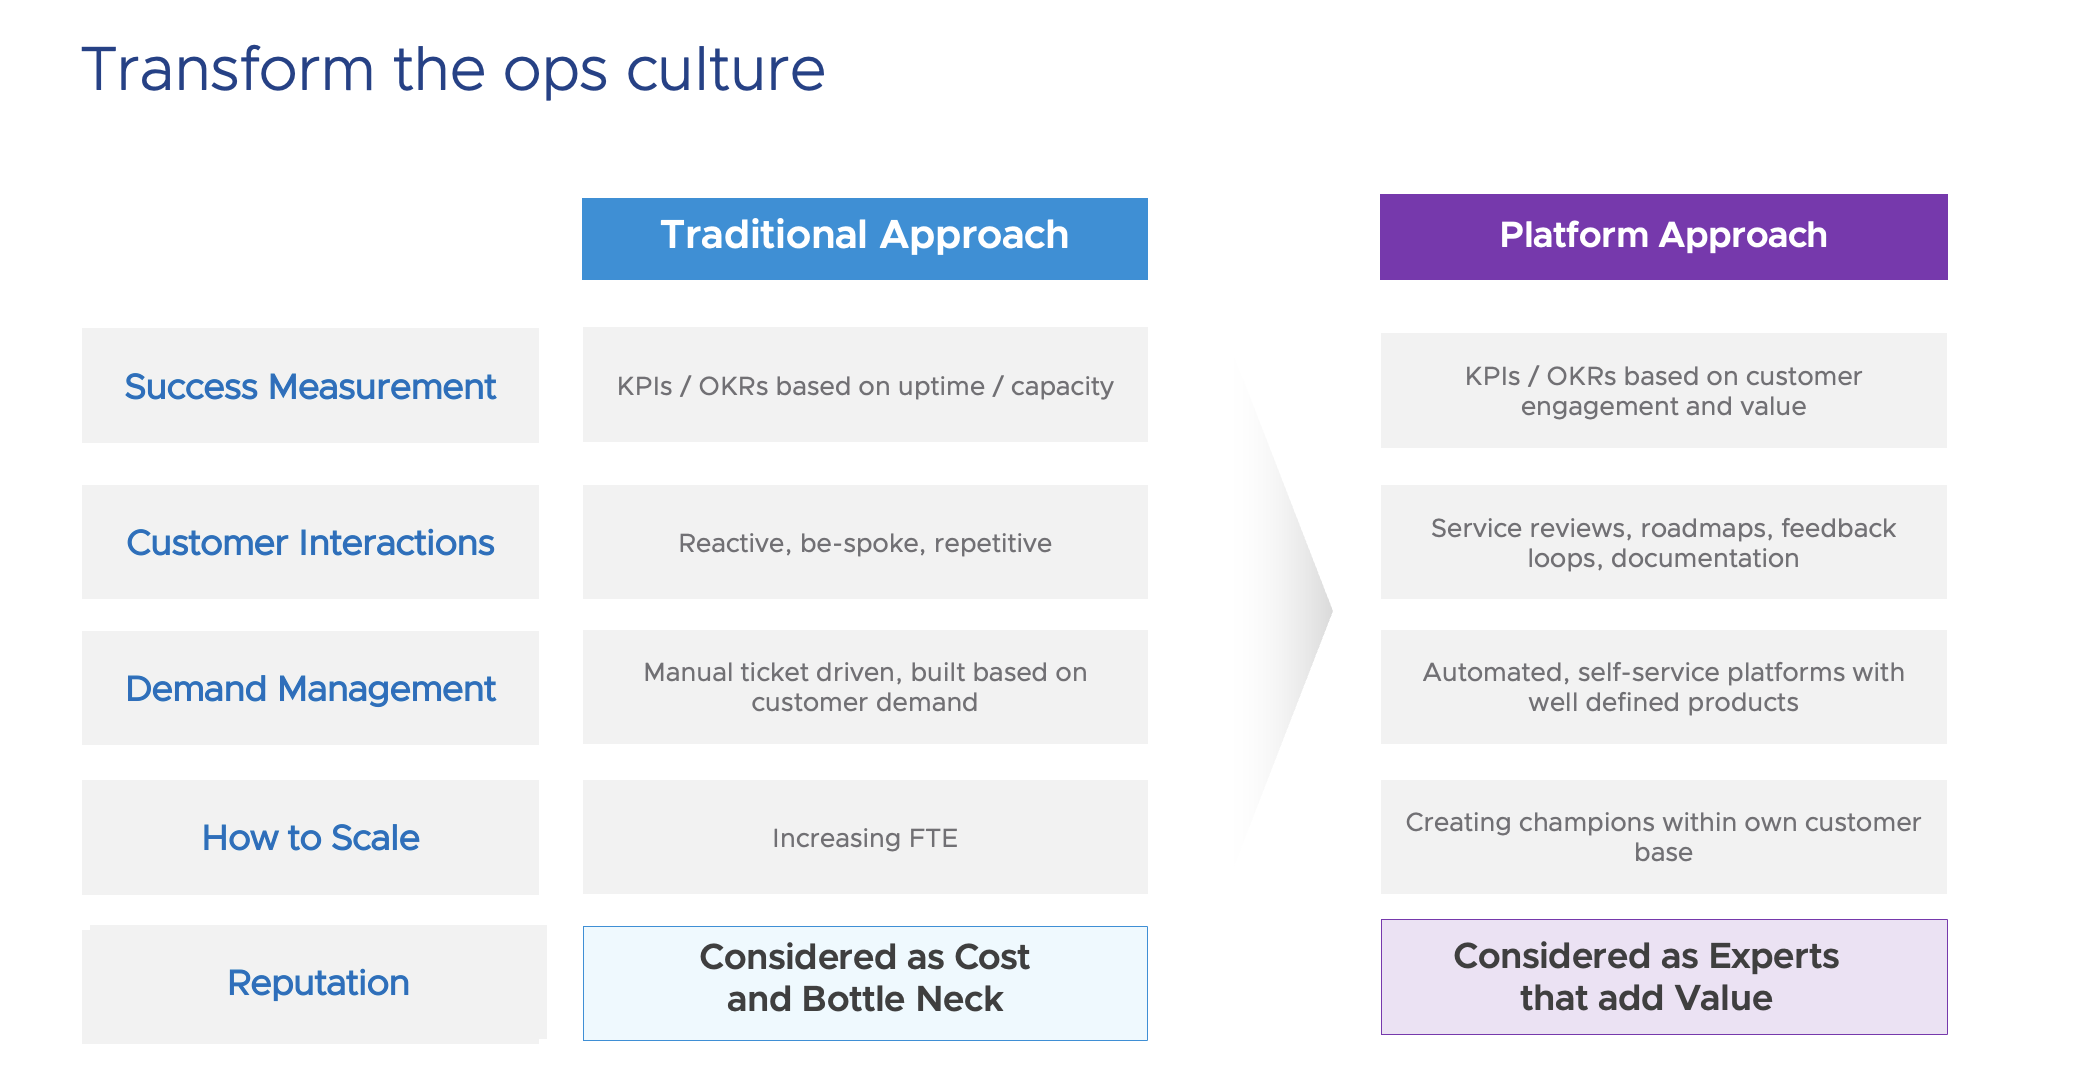 Platform practices, from old to new